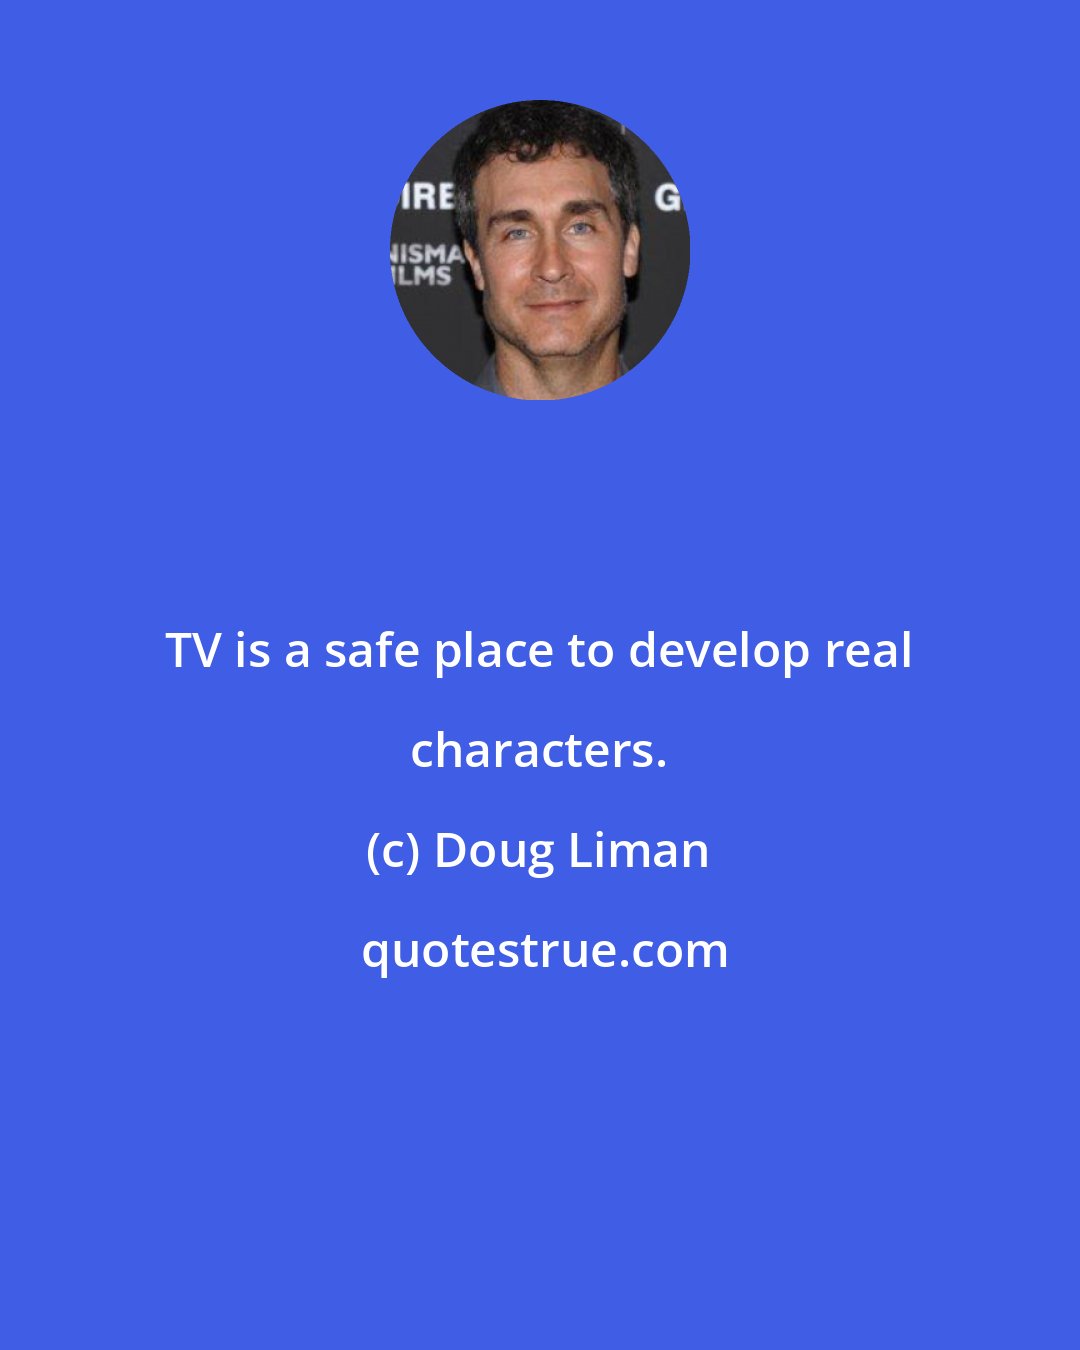 Doug Liman: TV is a safe place to develop real characters.